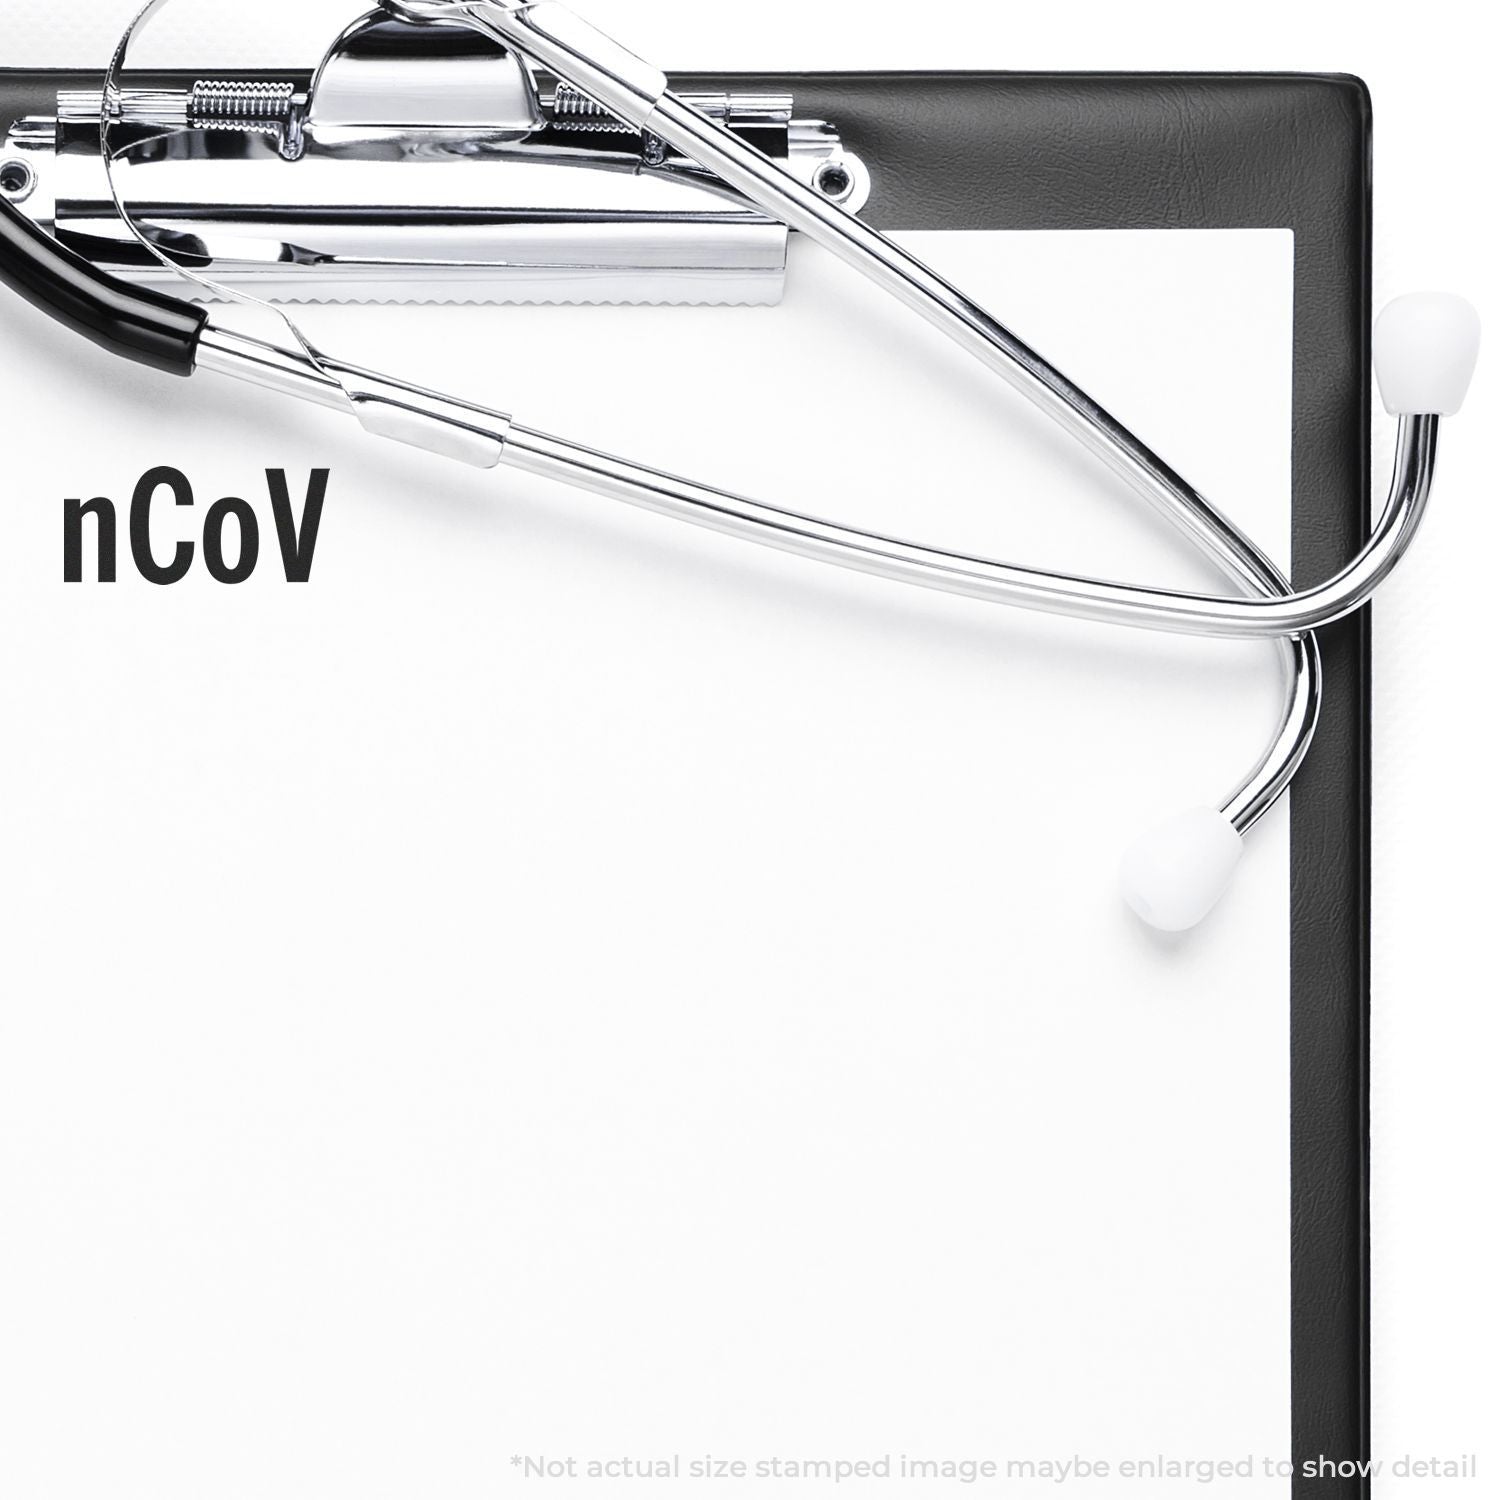 A self-inking stamp with a stamped image showing how the text "nCoV" is displayed after stamping.